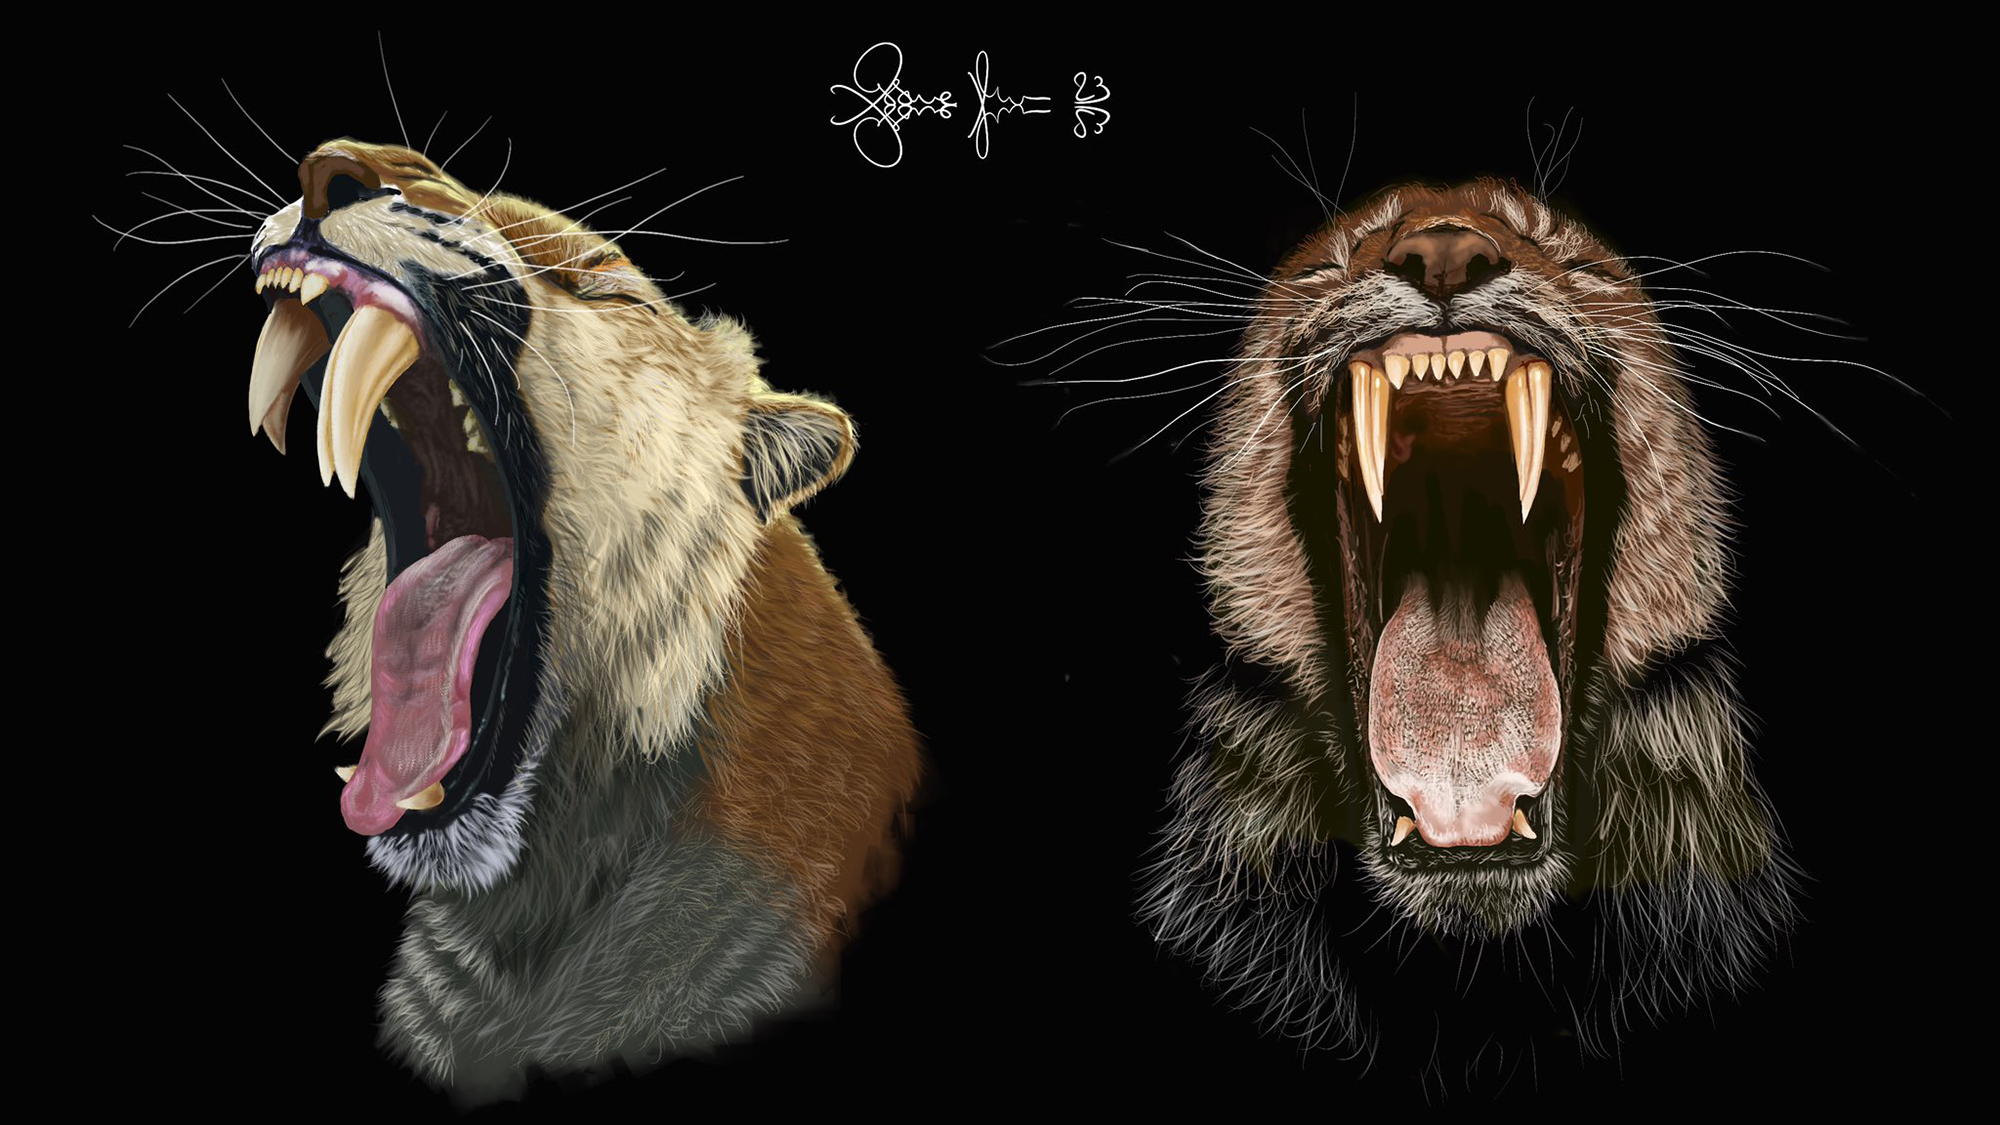 A mechanical analysis of the distinctive canines of California's saber-toothed cat (Smilodon fatalis) suggests that the baby tooth that preceded each saber stayed in place for years to stabilize the growing permanent saber tooth, perhaps allowing adolescents to learn how to hunt without breaking them.